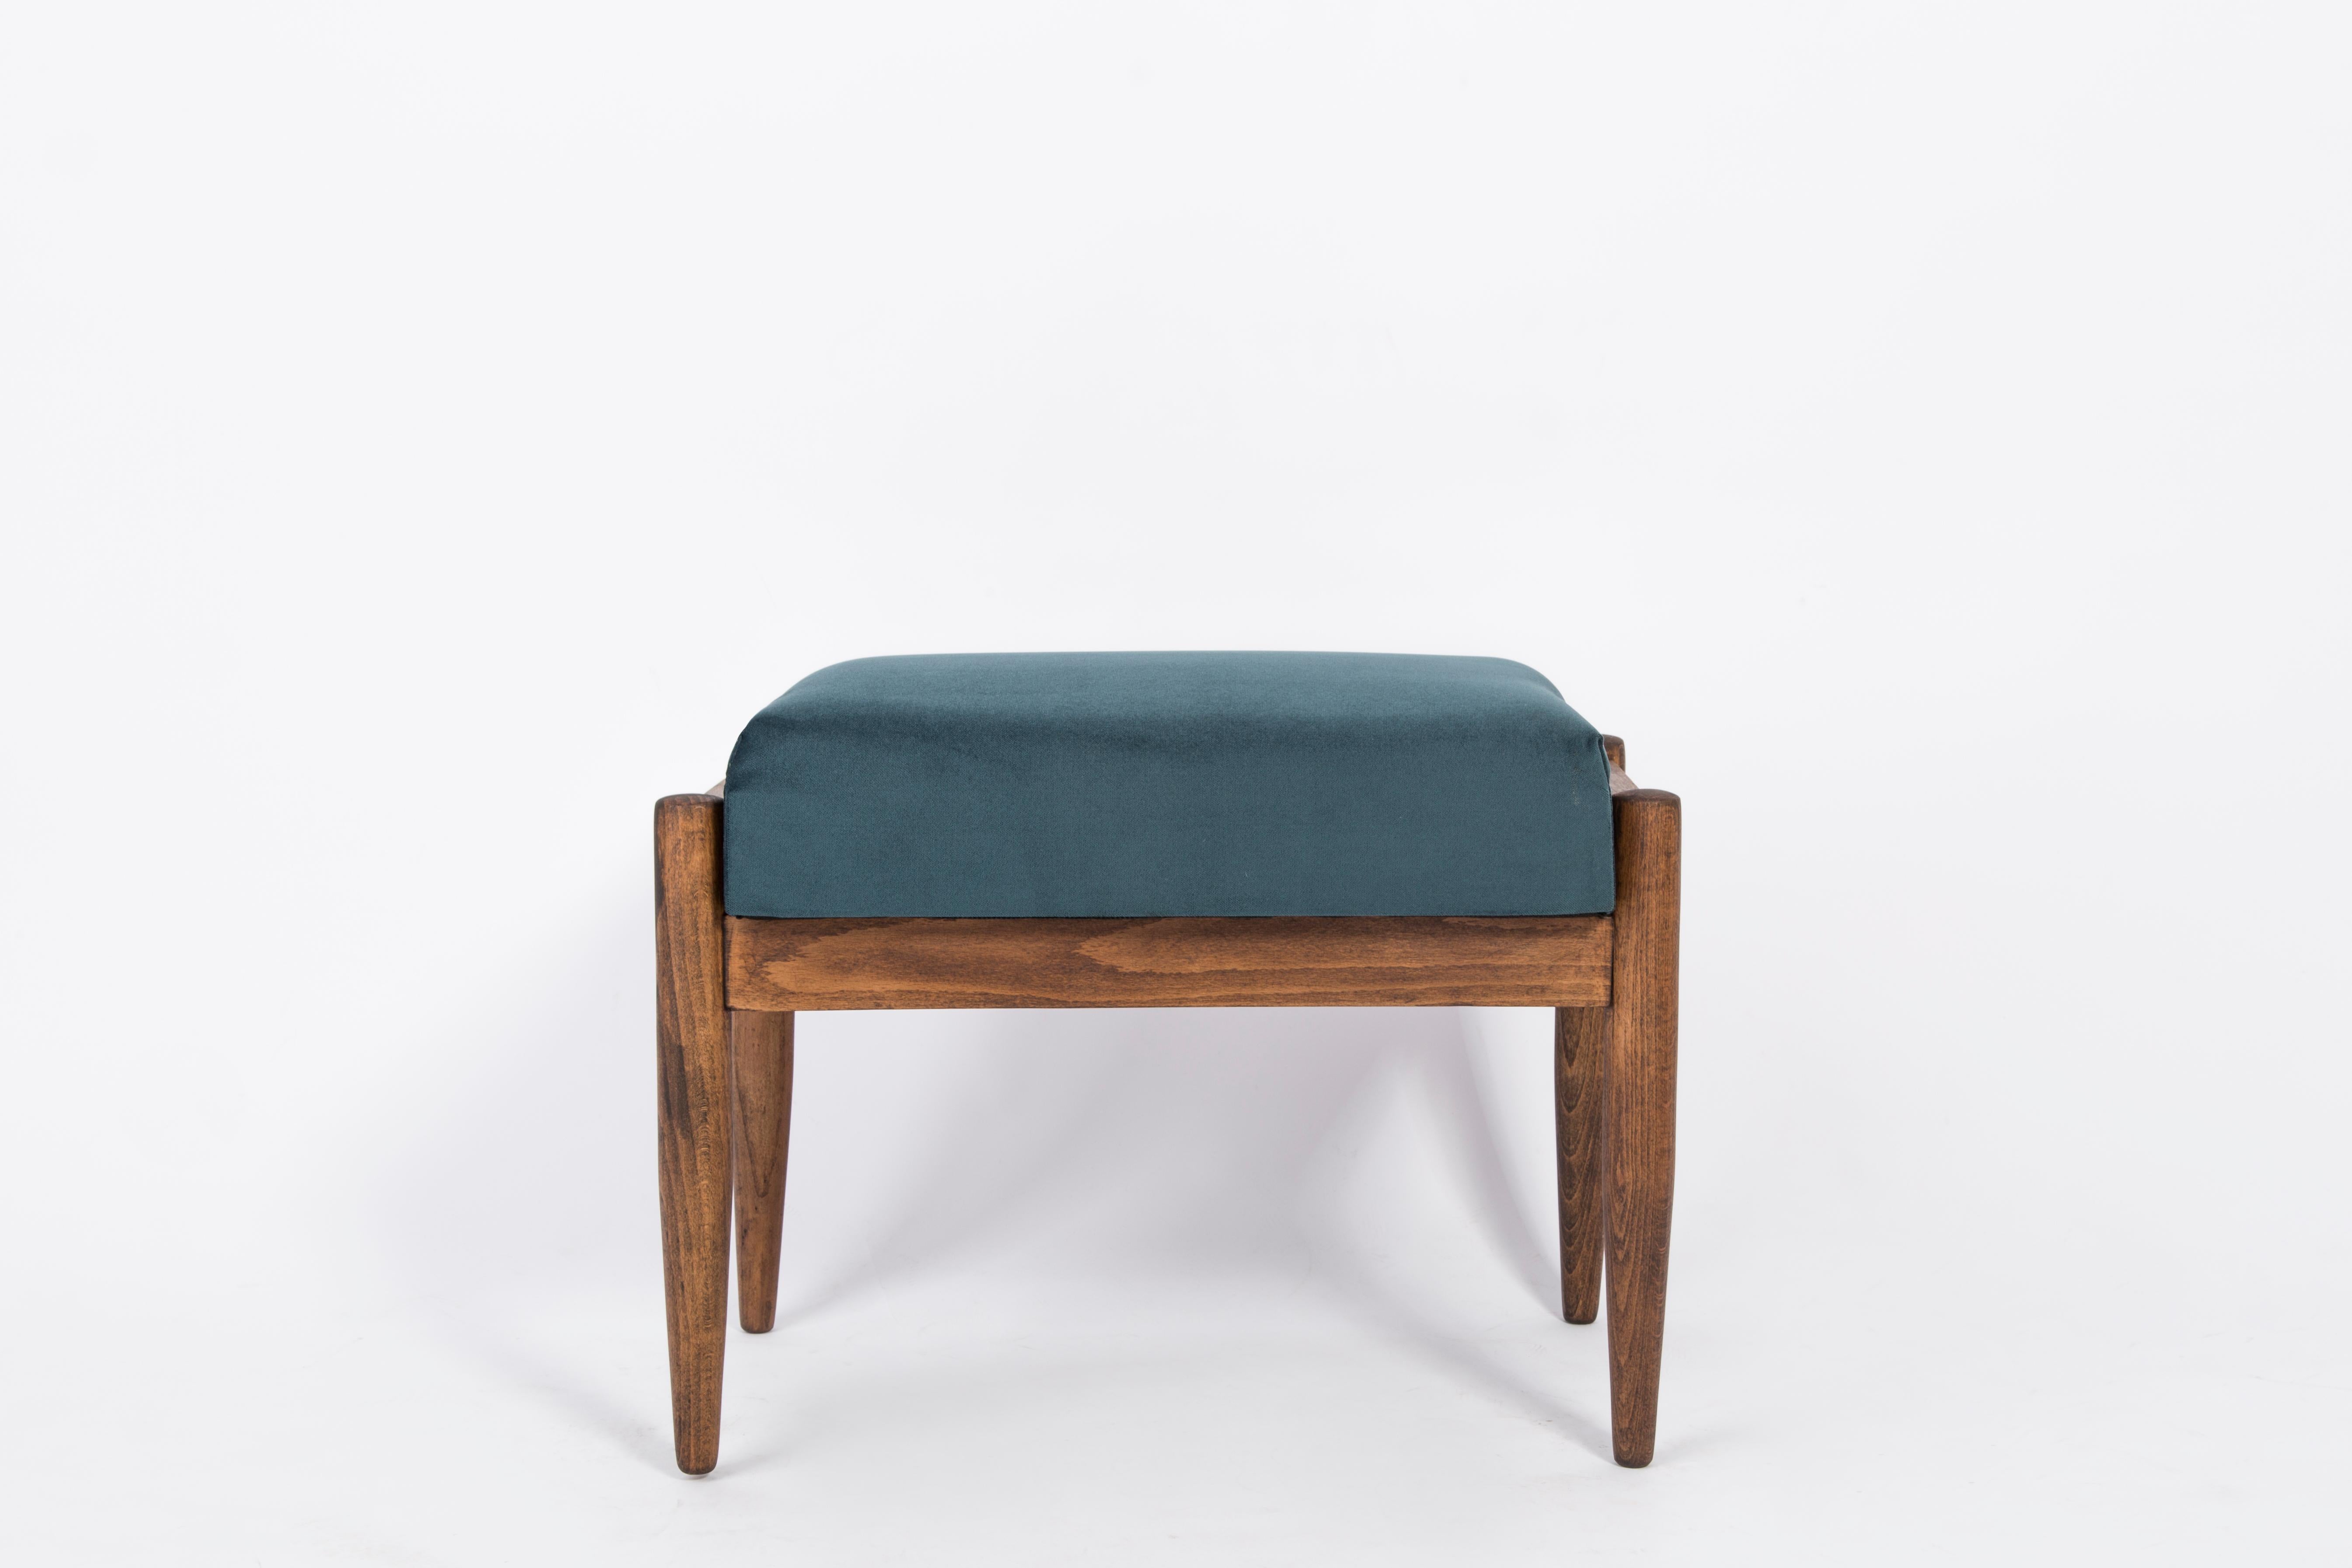 Set of Petrol Blue Vintage Armchair and Stool, Edmund Homa, 1960s For Sale 3